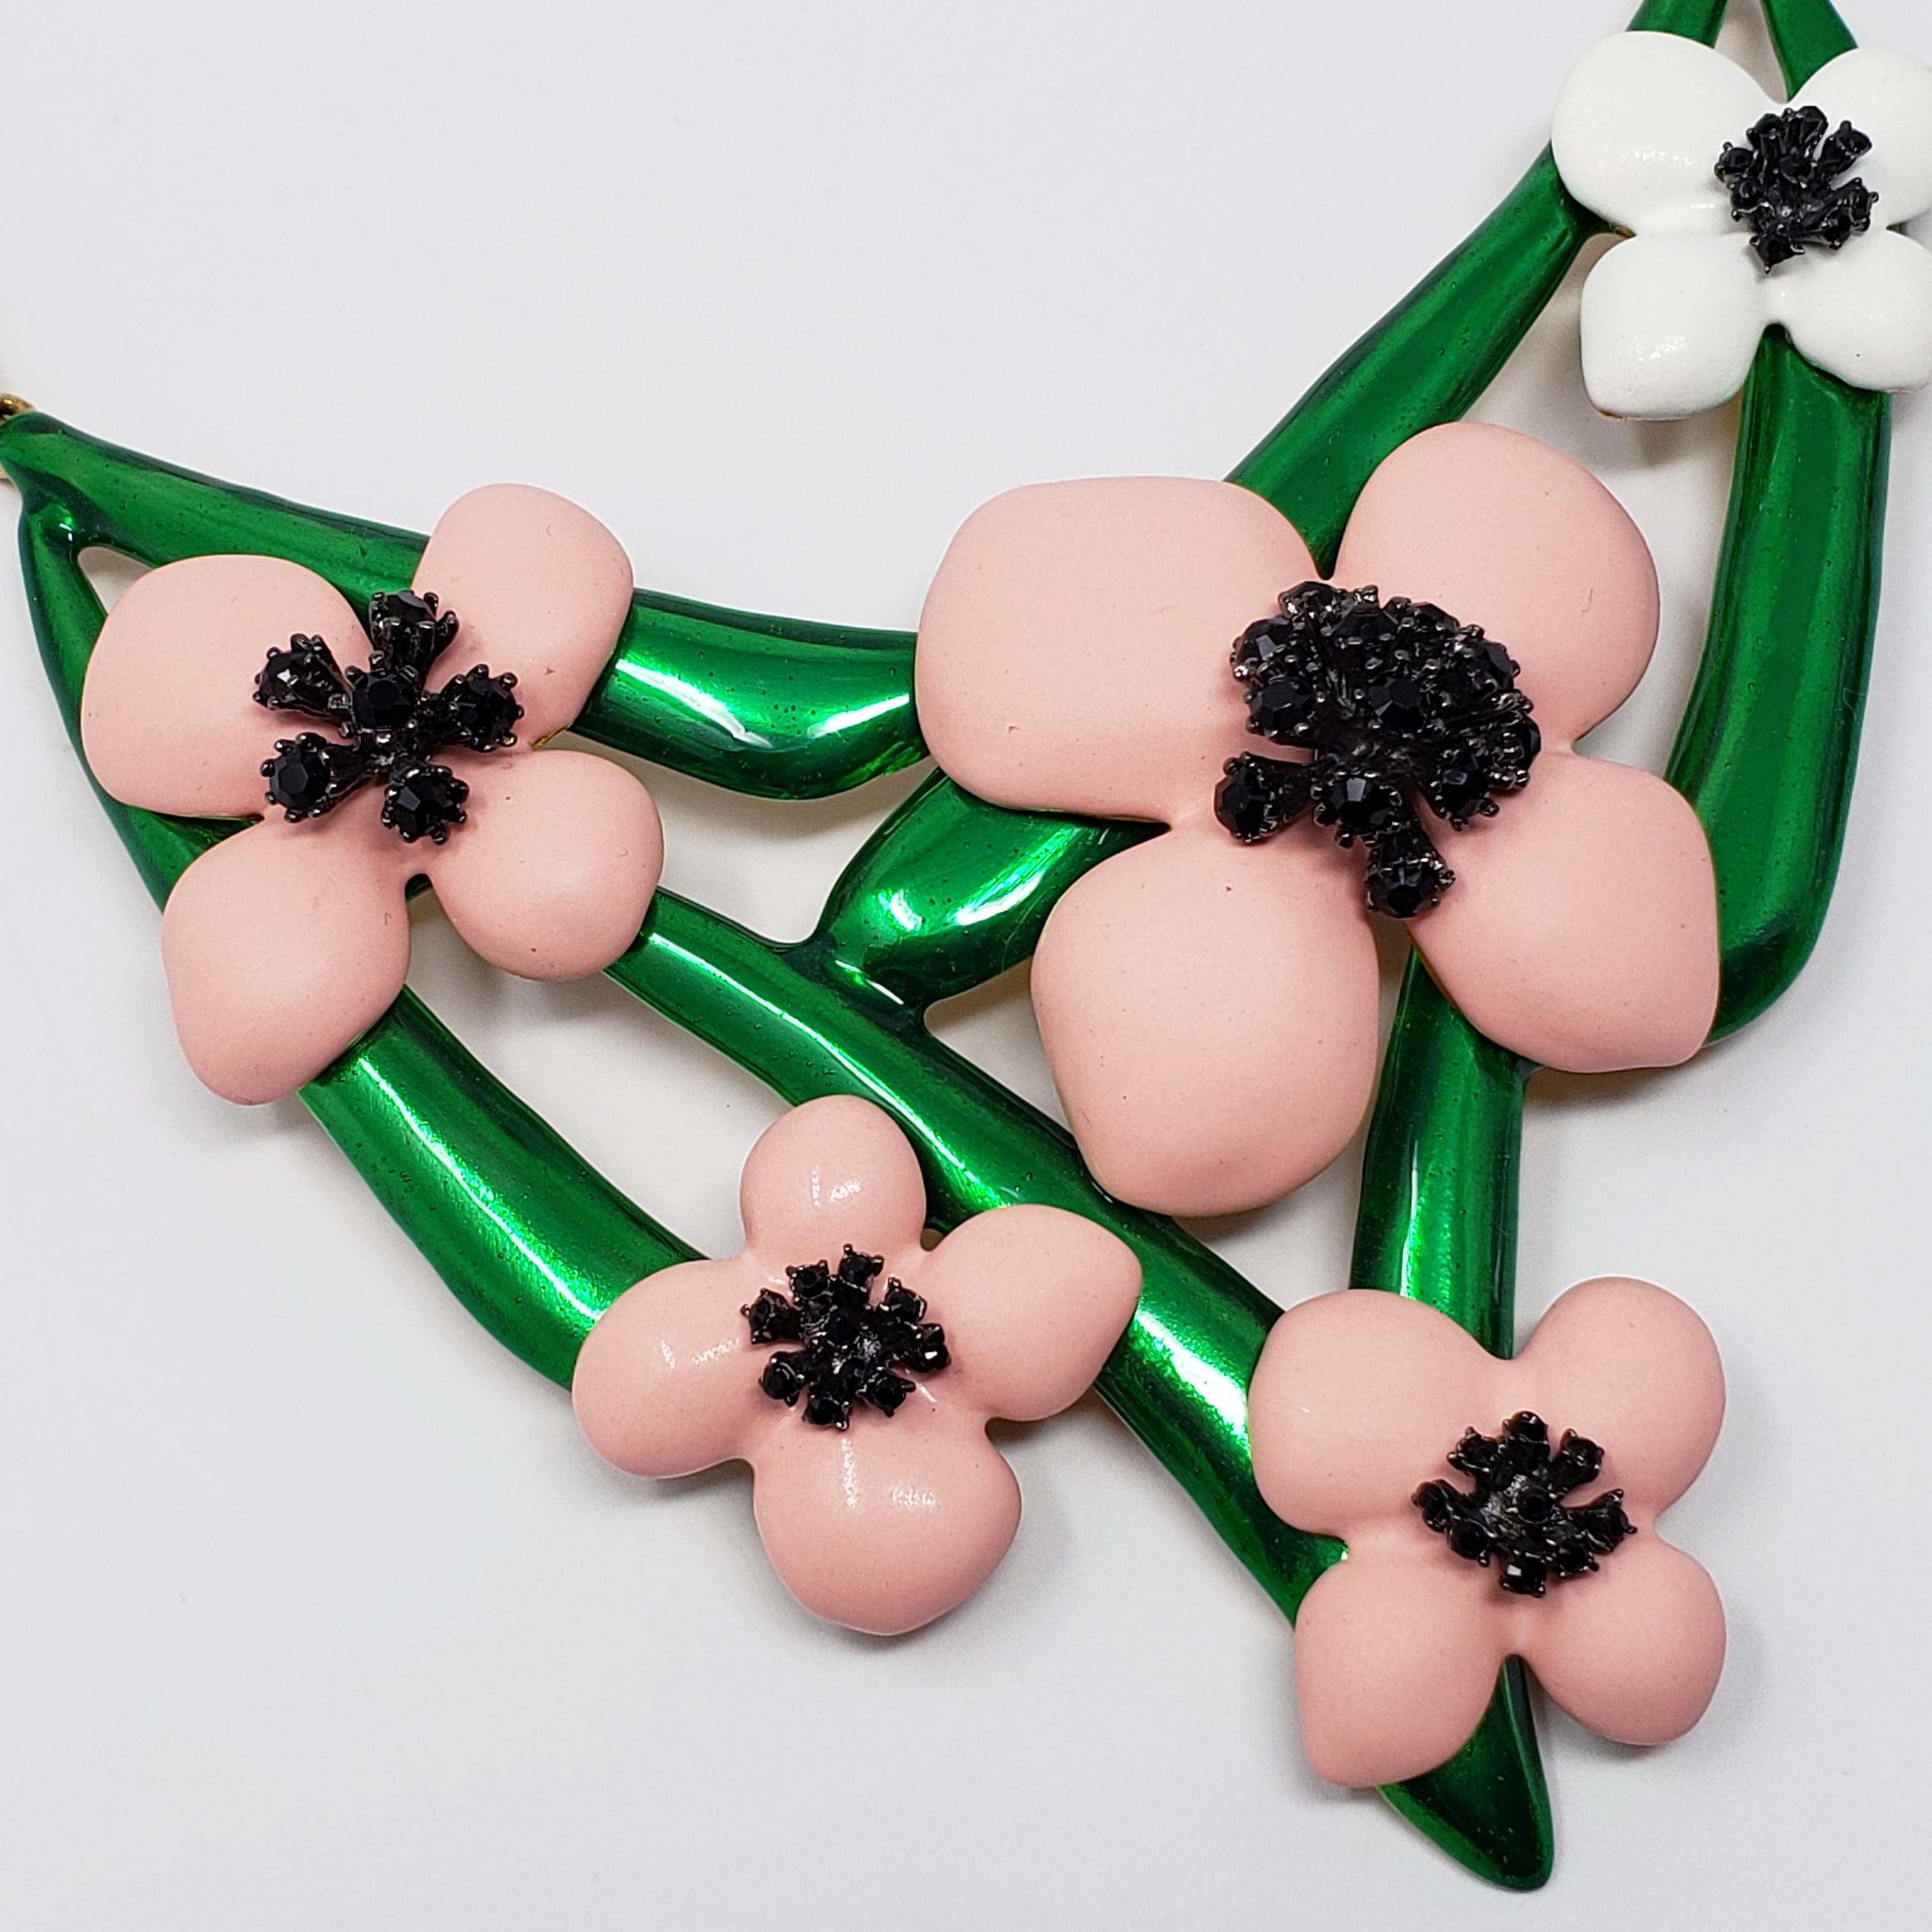 A blooming bouquet! A charming necklace from a rare Oscar de la Renta floral collection. The flowers feature soft pink and white resin petals on a painted green, gold plated setting. The jet black crystals add striking contrast to these bright and